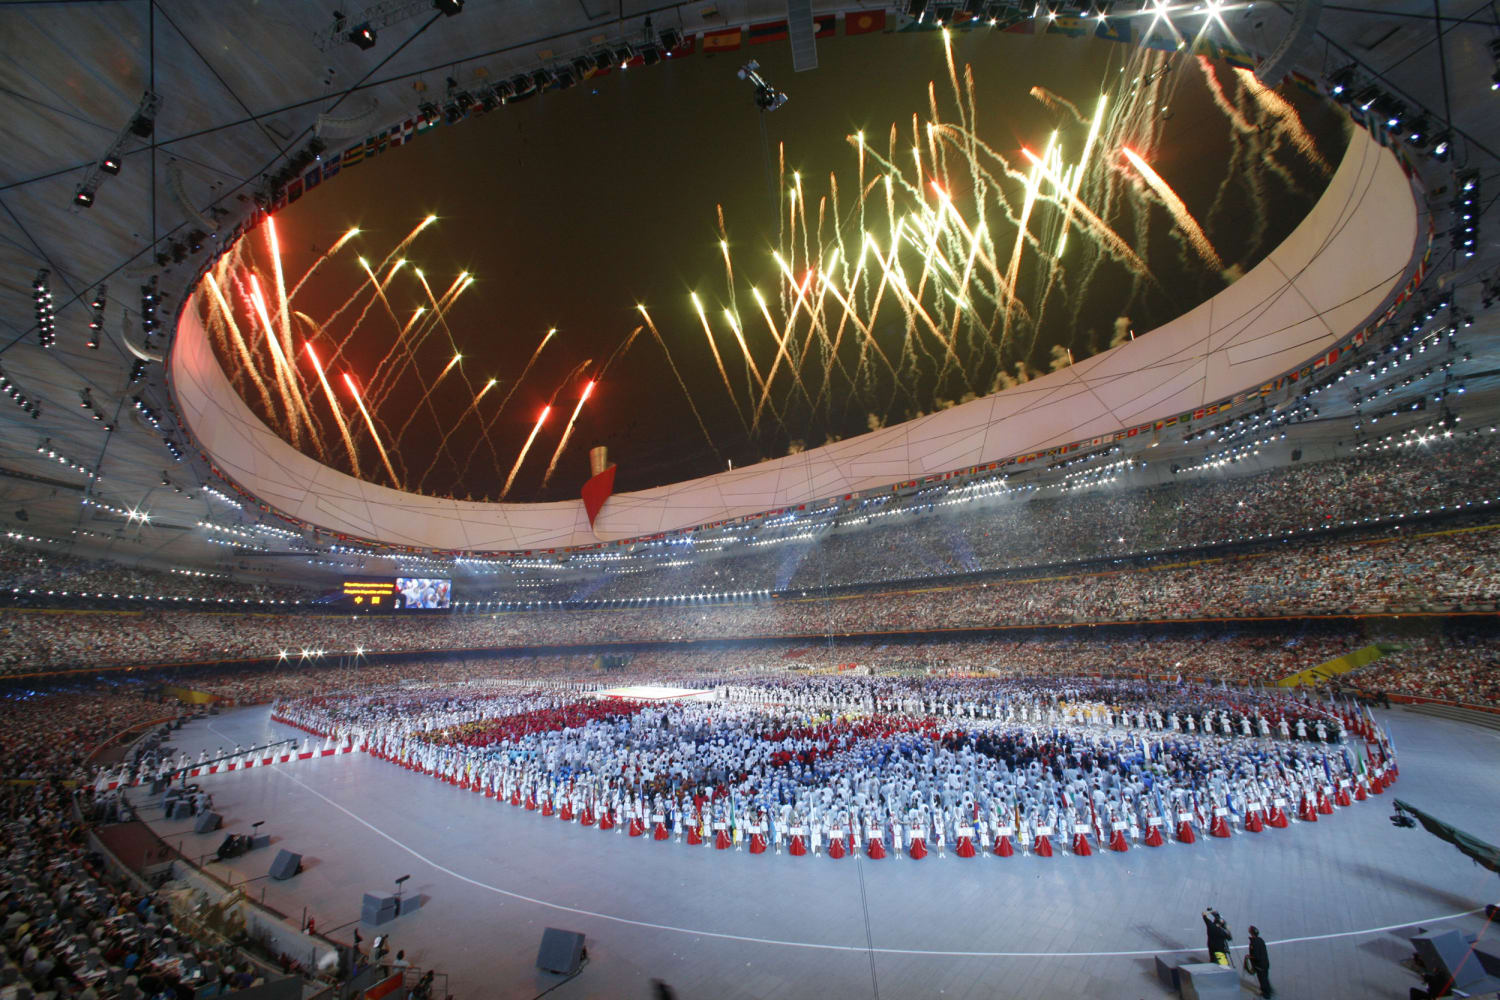 Beijing Olympics opening ceremony starts under cloud of COVID and